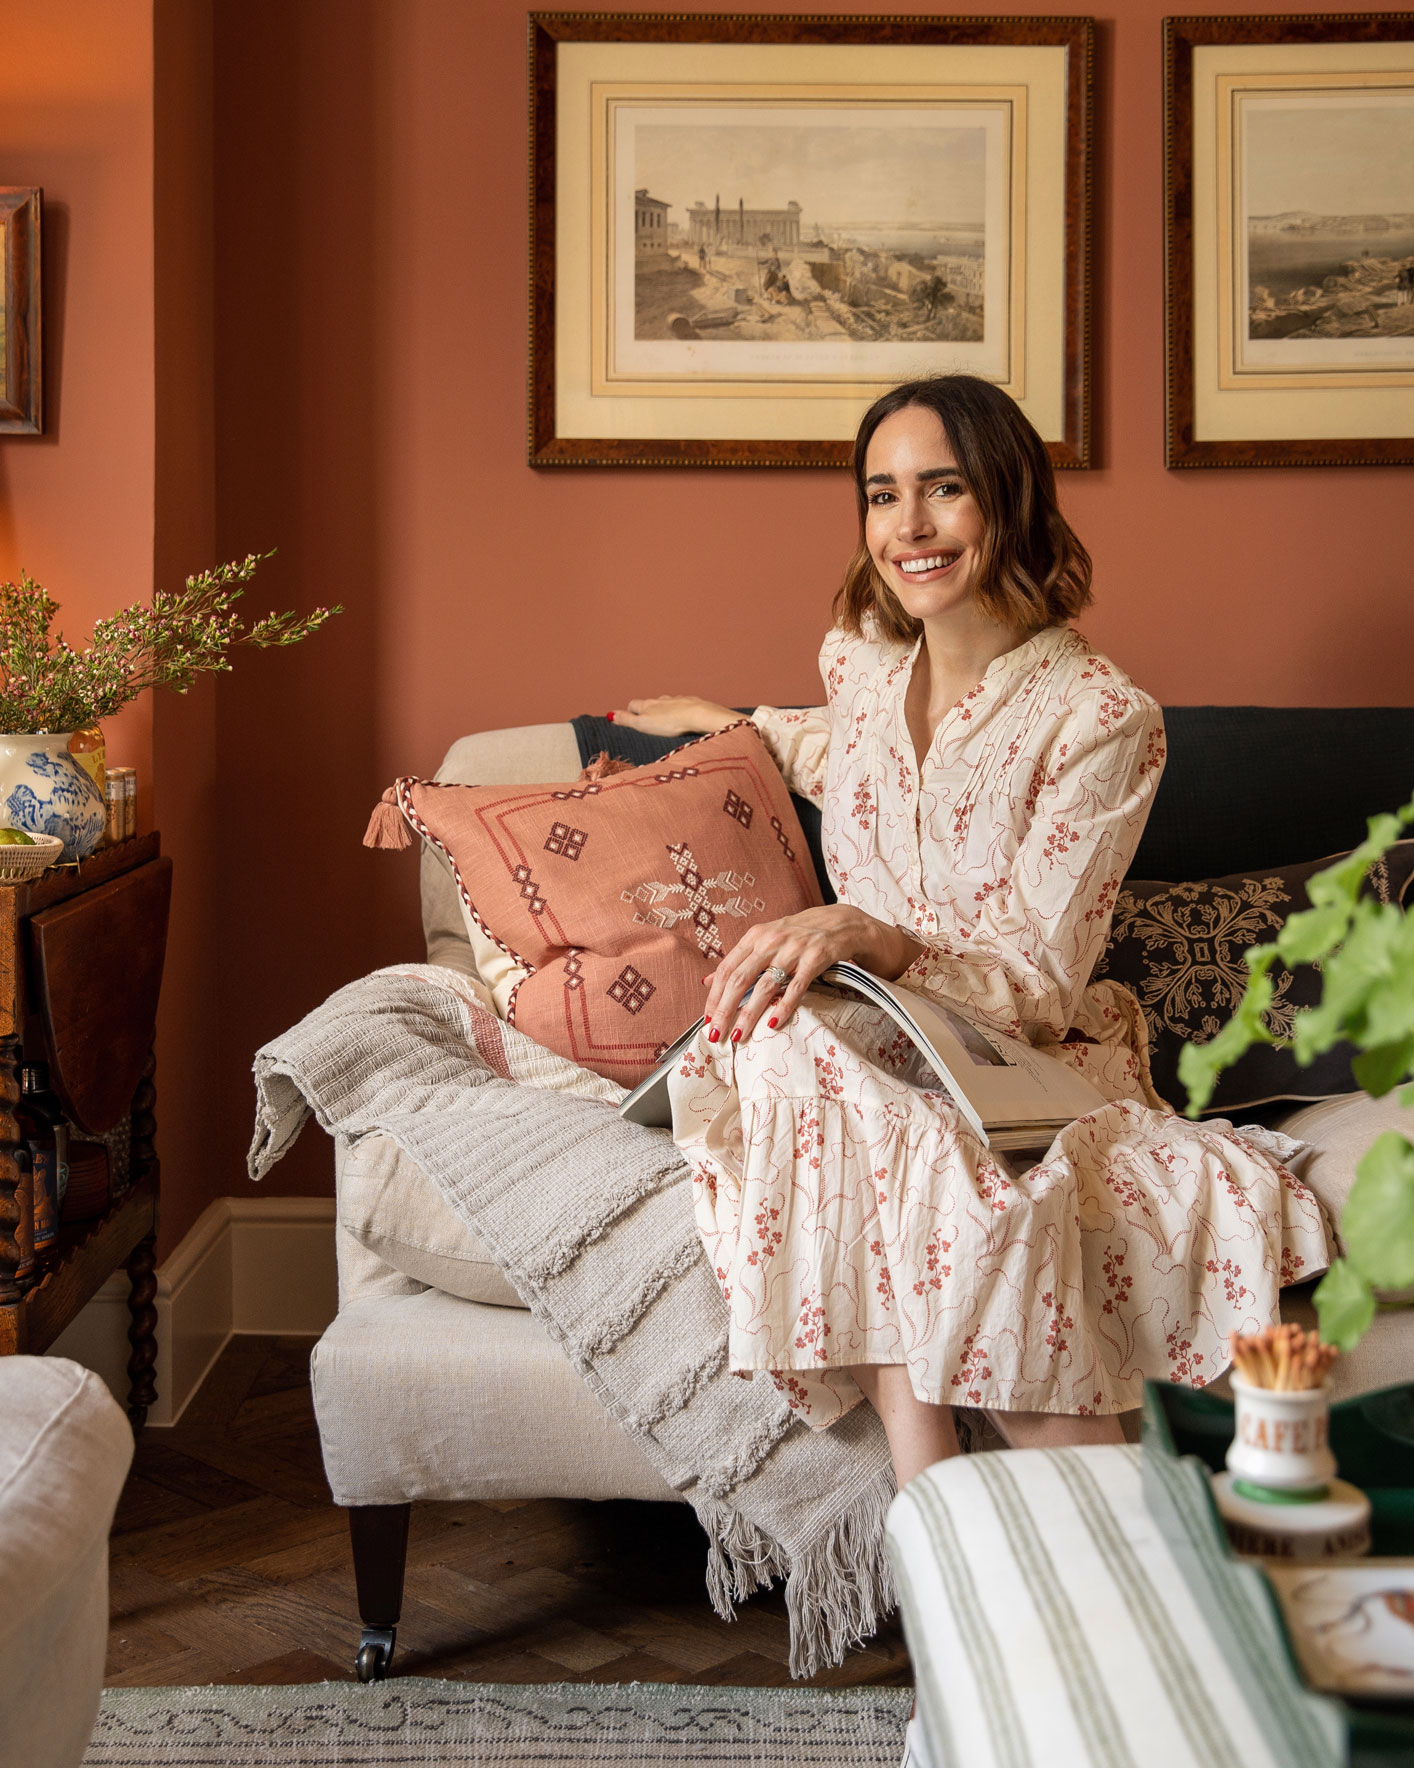 Louise Roe on the sofa shopping for Cybermonday